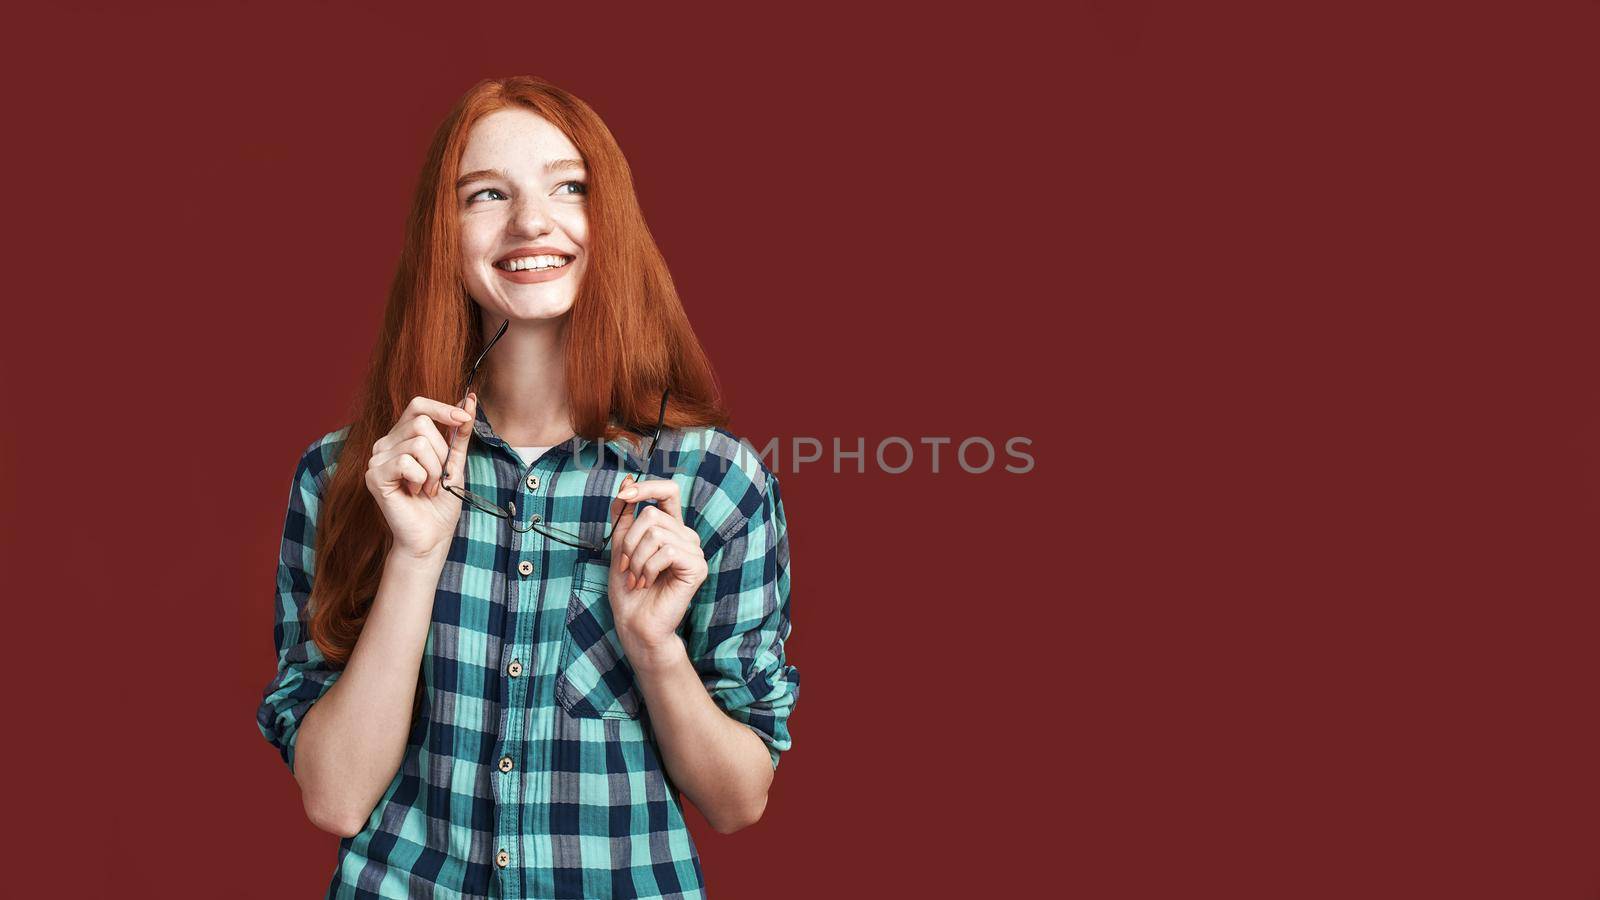 Glad, joyful, carefree girl with beautiful red long hair holding glasses and laughing while standing over red background